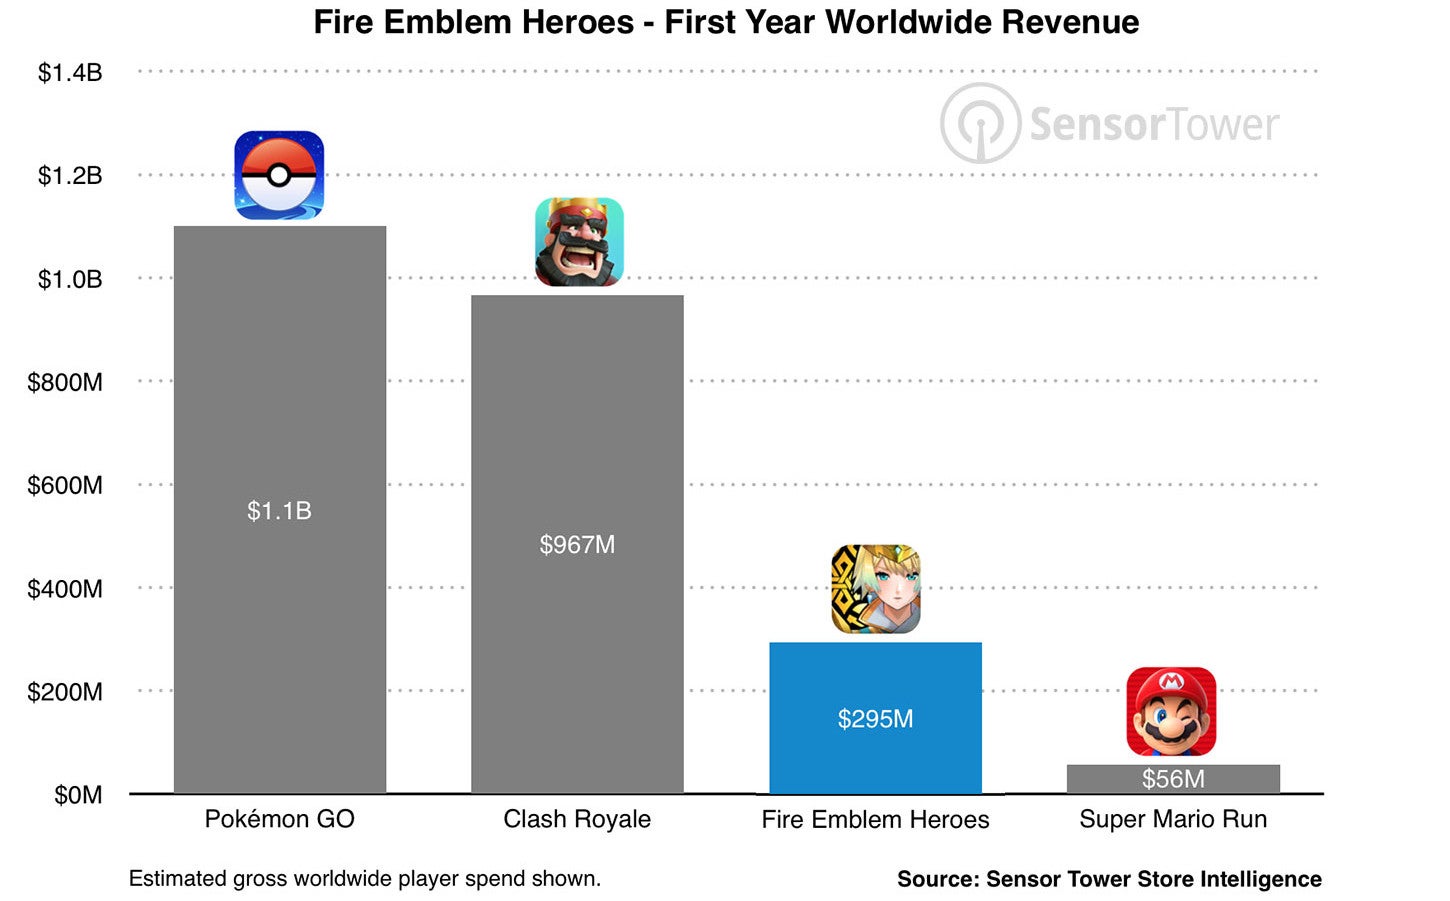 Fire Emblem Heroes brings Nintendo nearly one third of a billion dollars in just one year